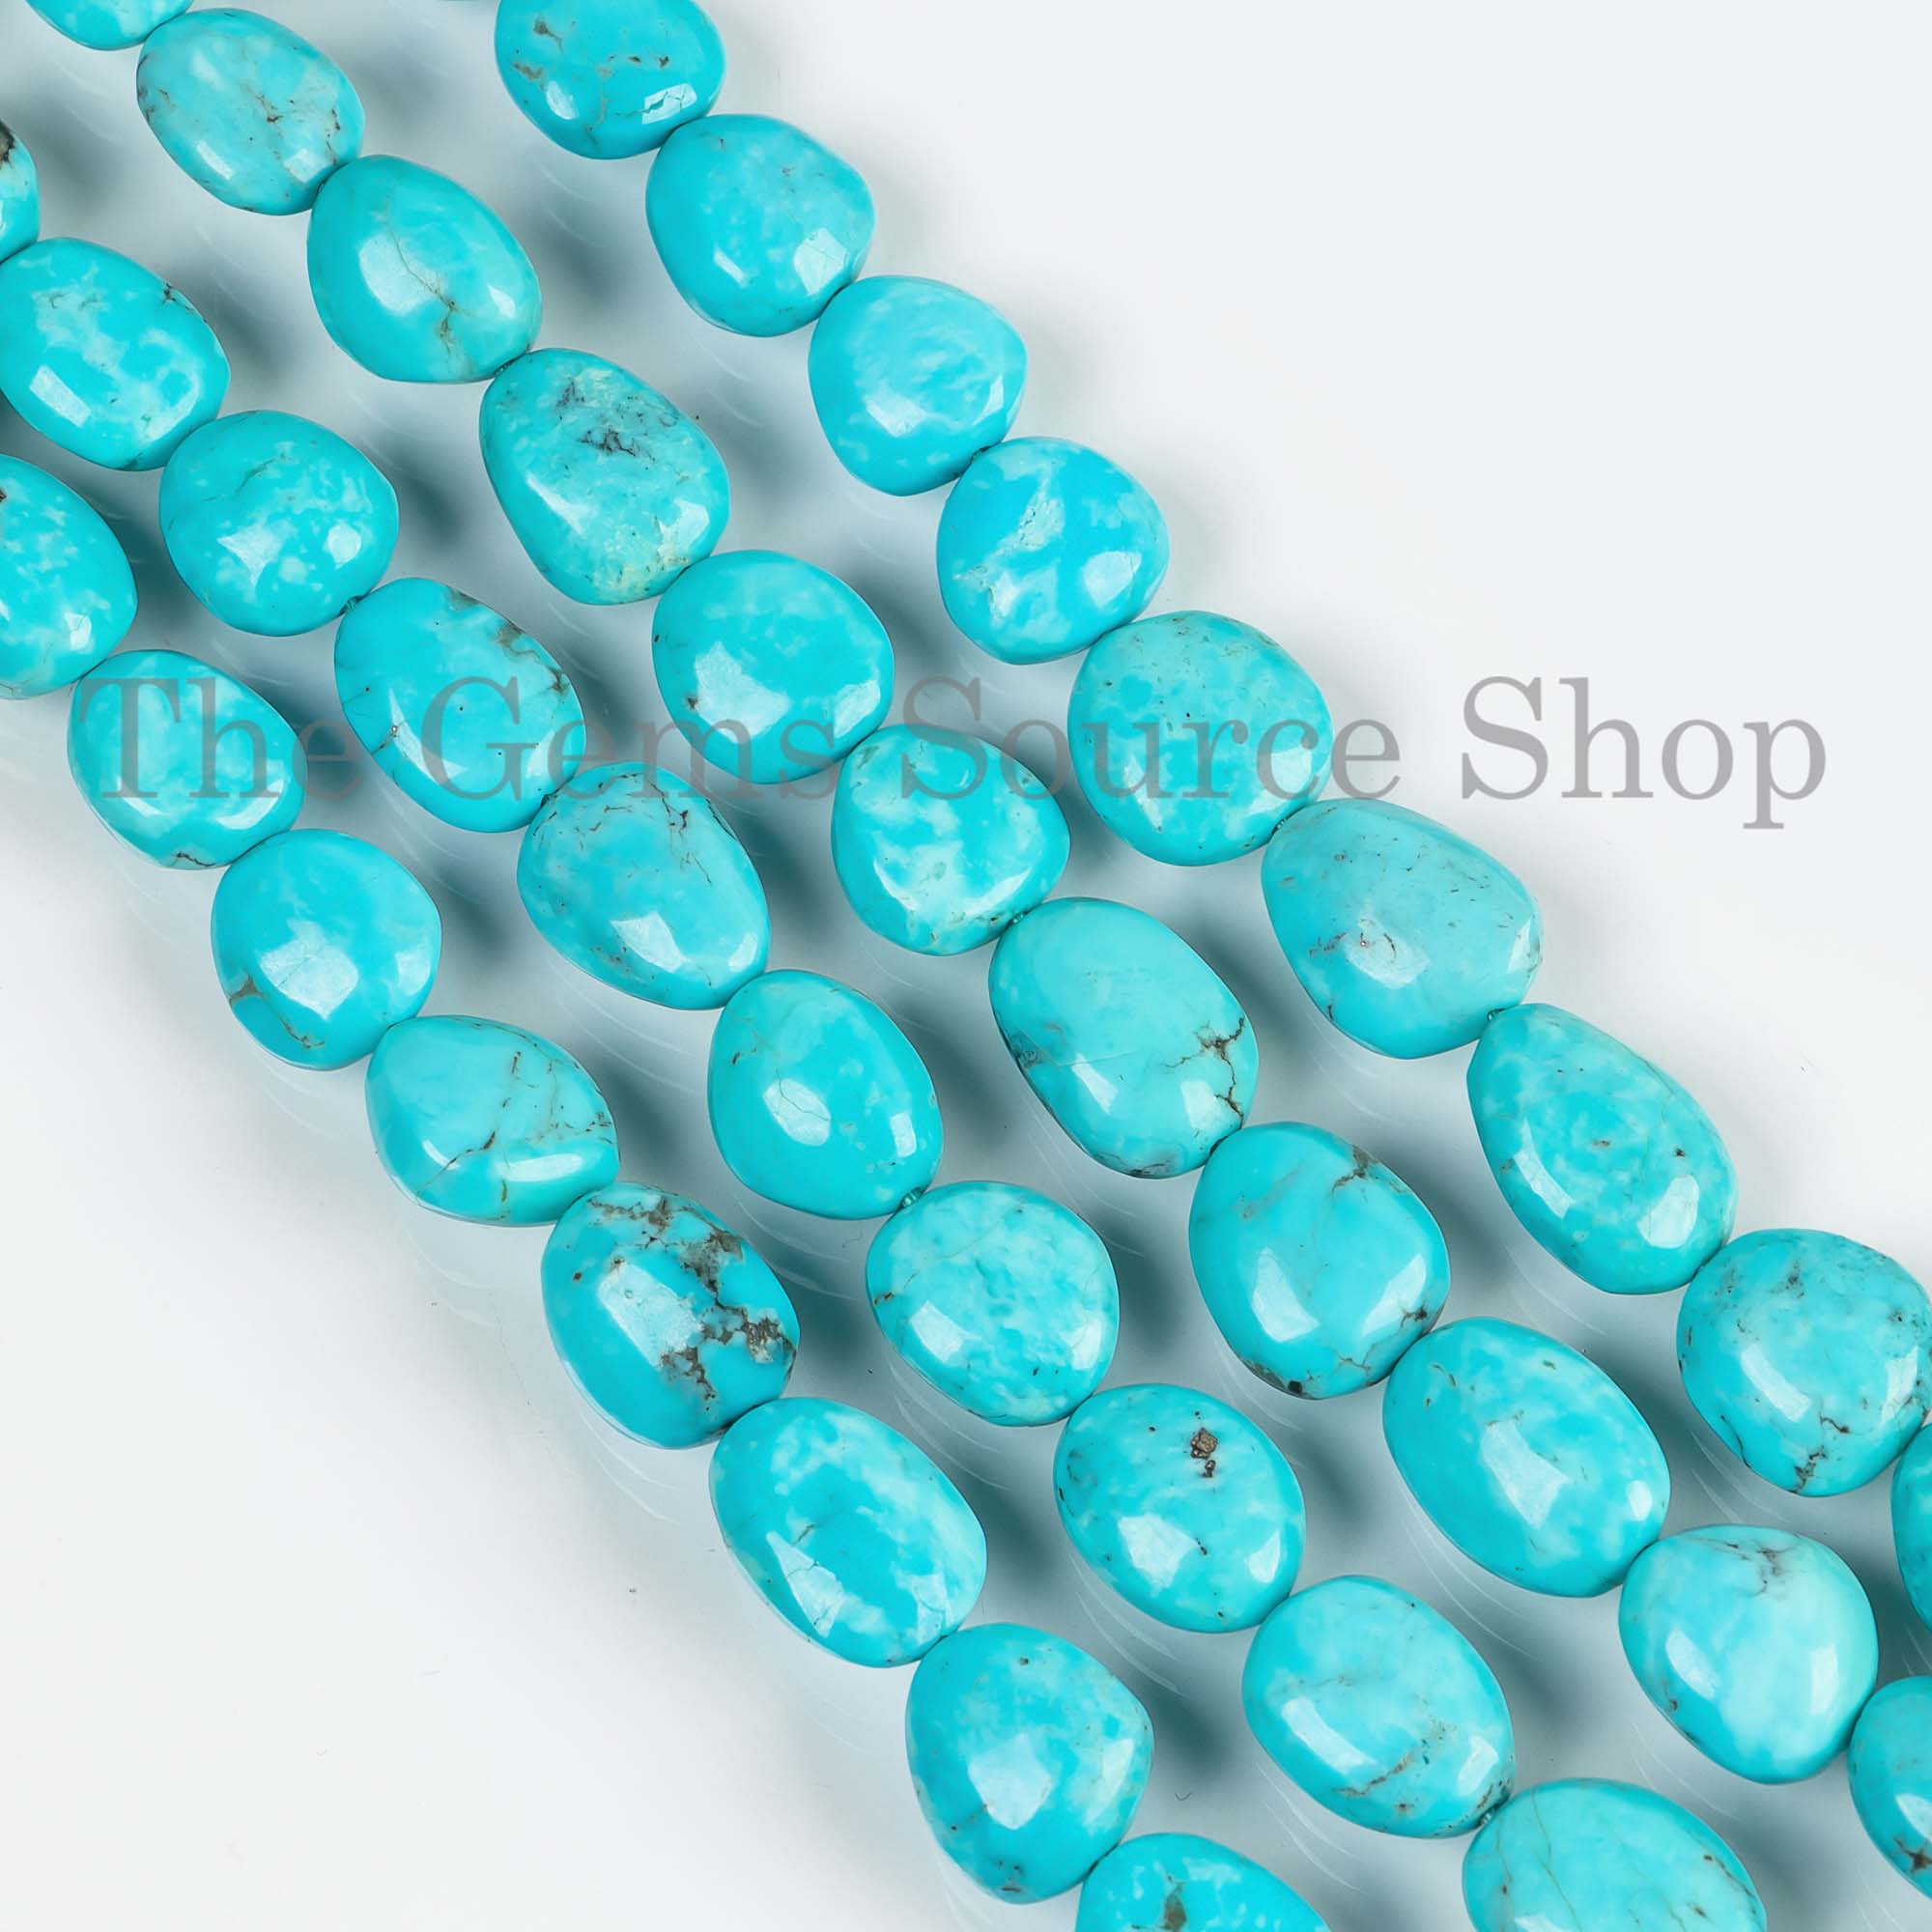 9x11-12x16mm Turquoise Smooth Nugget Beads, Turquoise Wholesale Beads, Turquoise Gemstone Beads, Fancy Nugget Beads For Jewelry